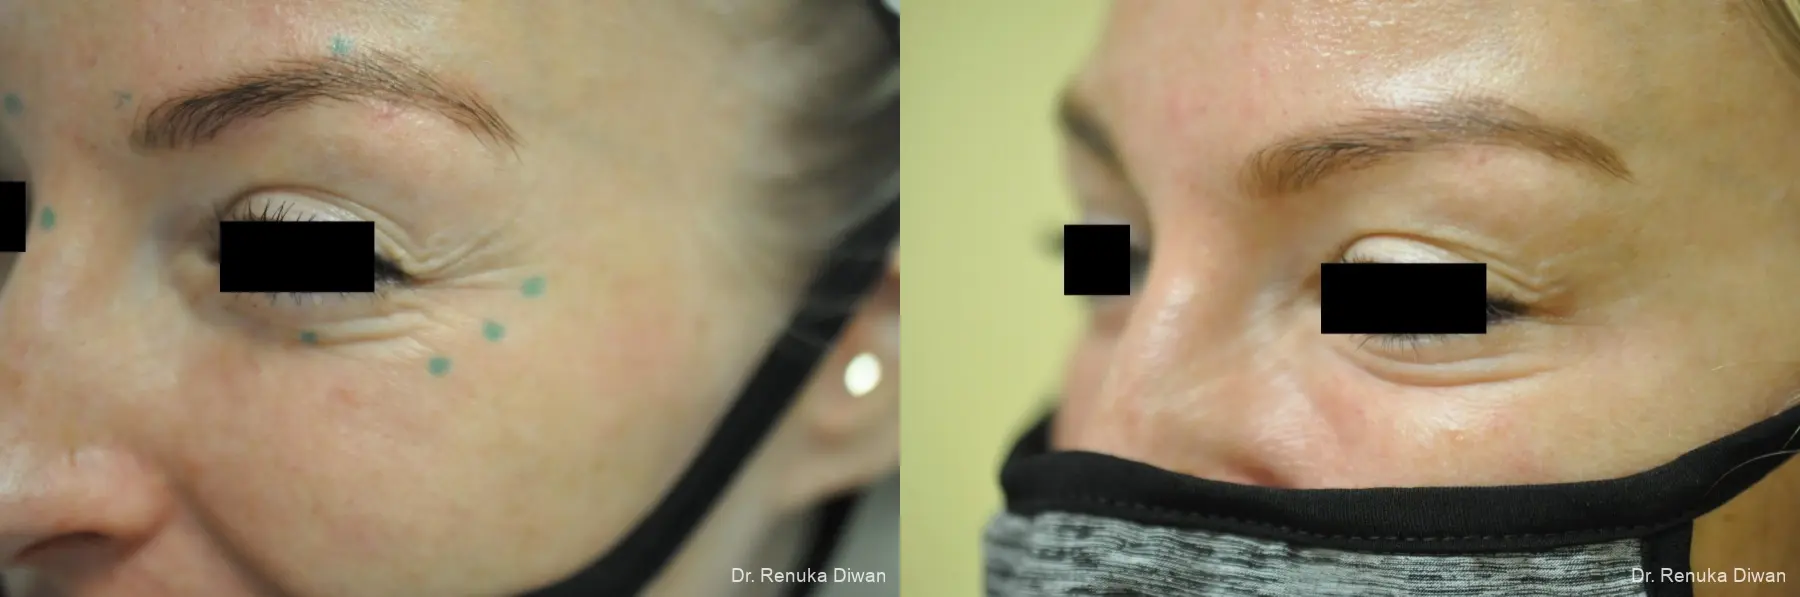 BOTOX® Cosmetic: Patient 33 - Before and After 2